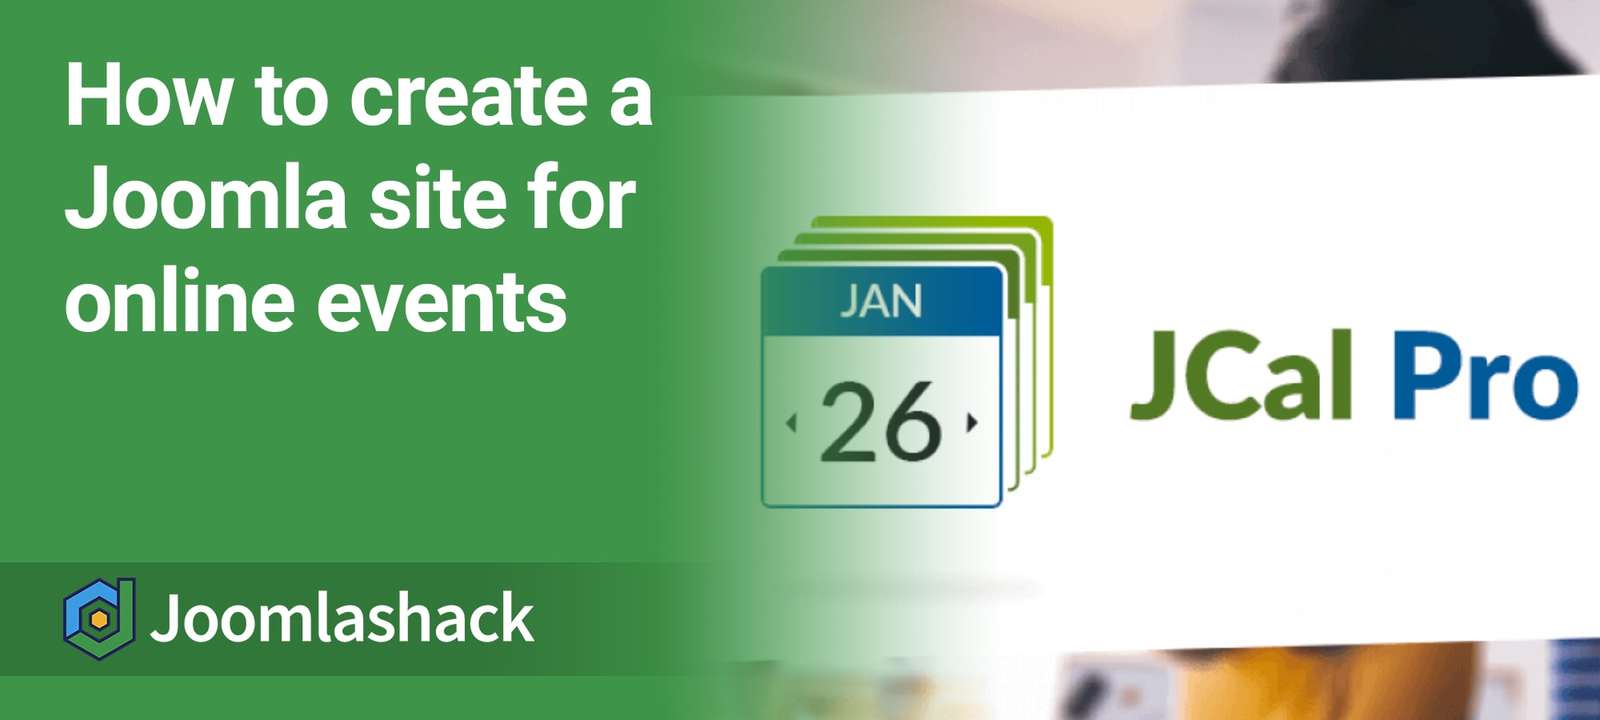 How to Create an Online Events Joomla Site with JCal Pro